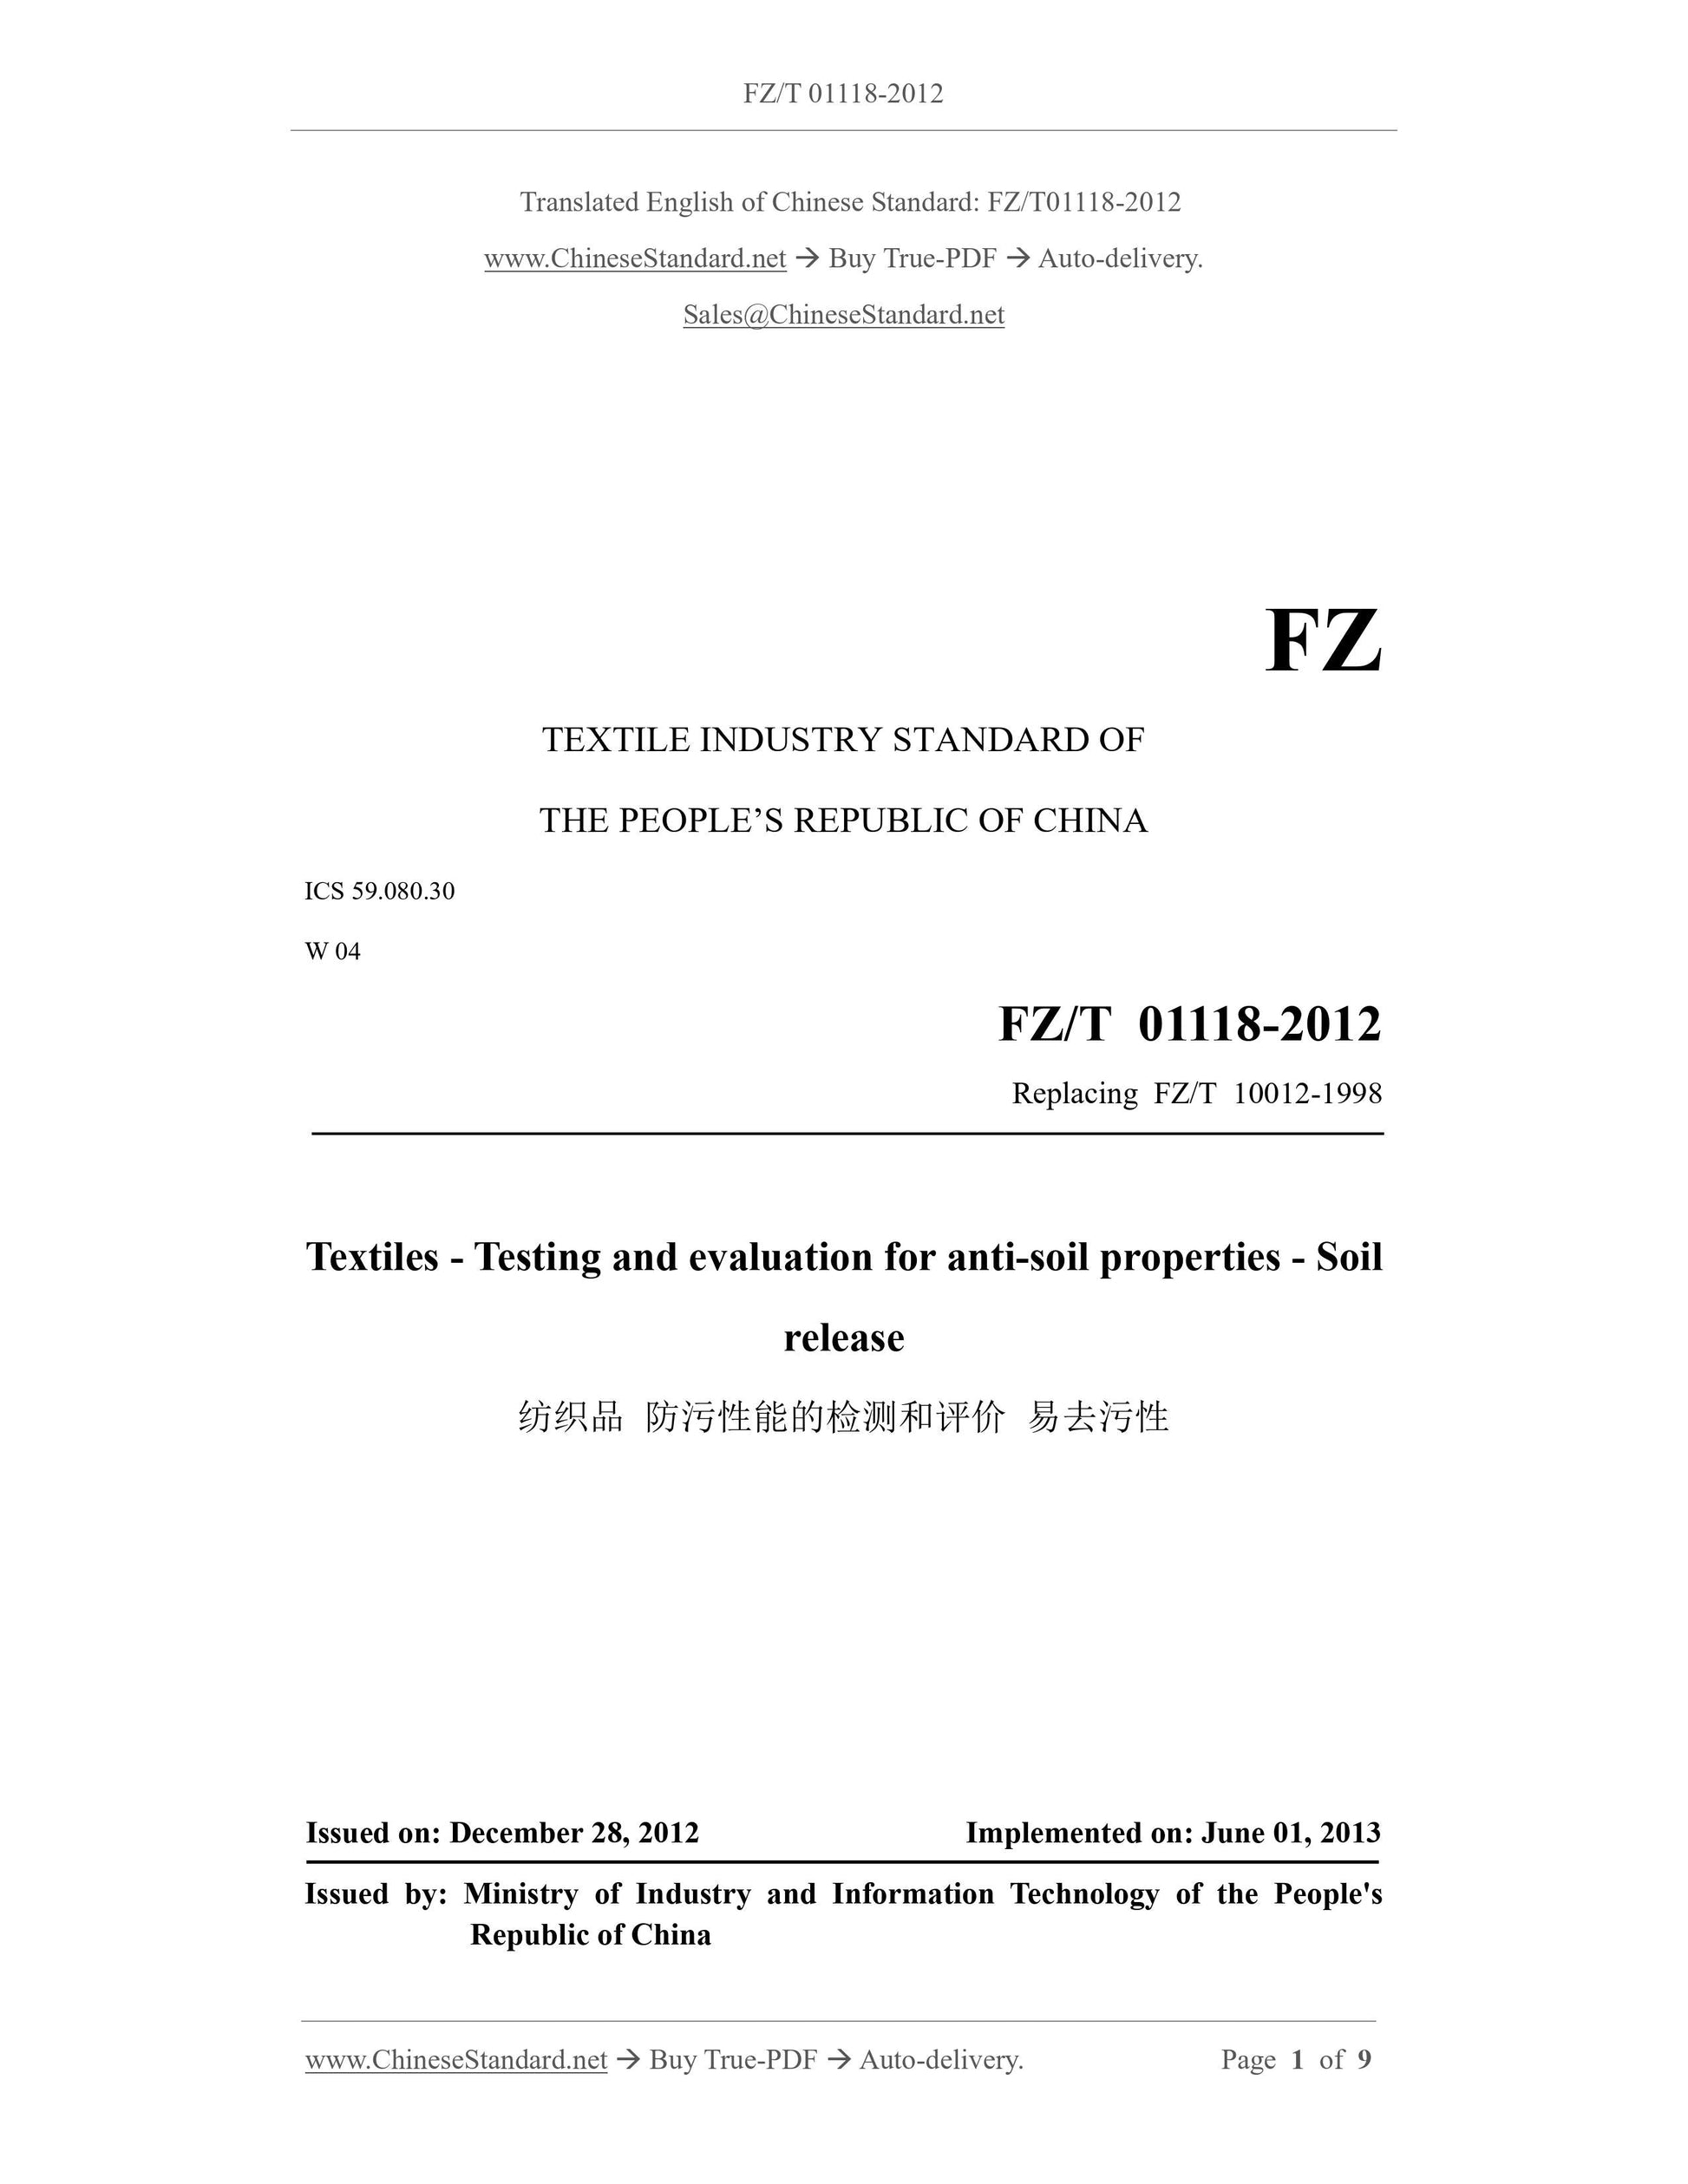 FZ/T 01118-2012 Page 1